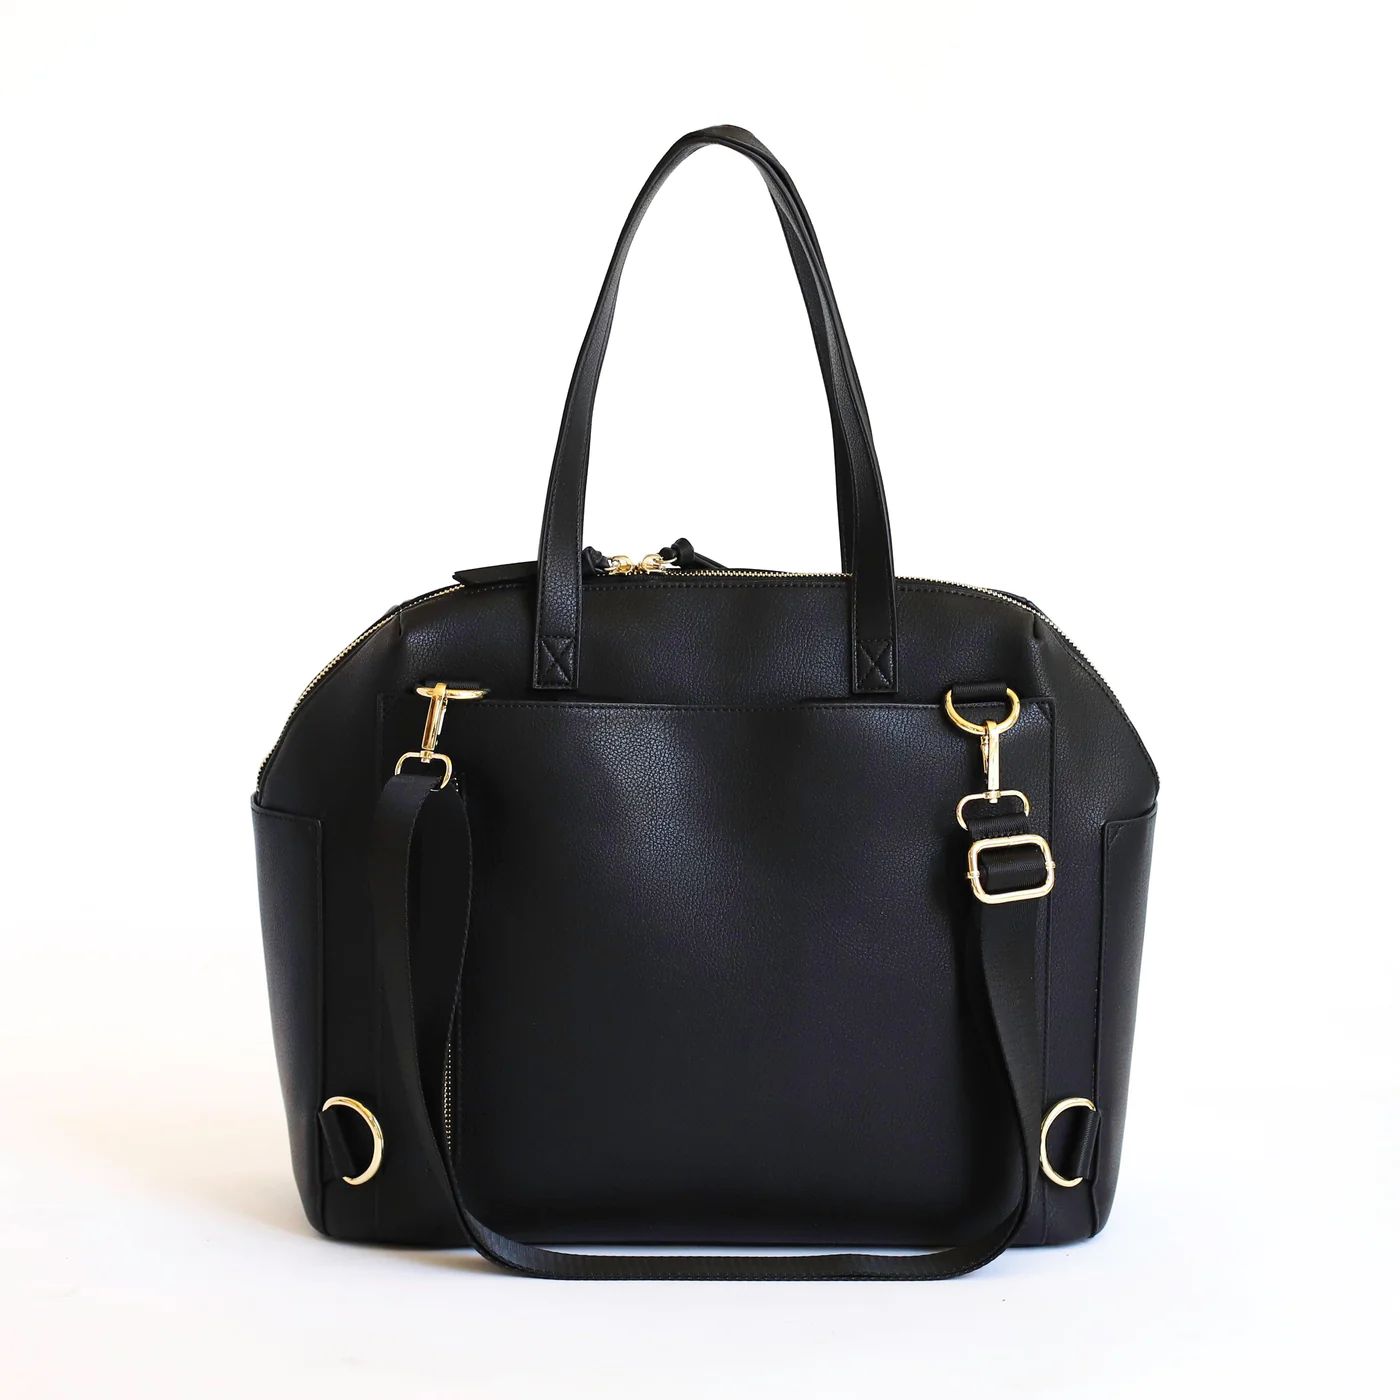 Black Carryall Convertible Tote | Maedn